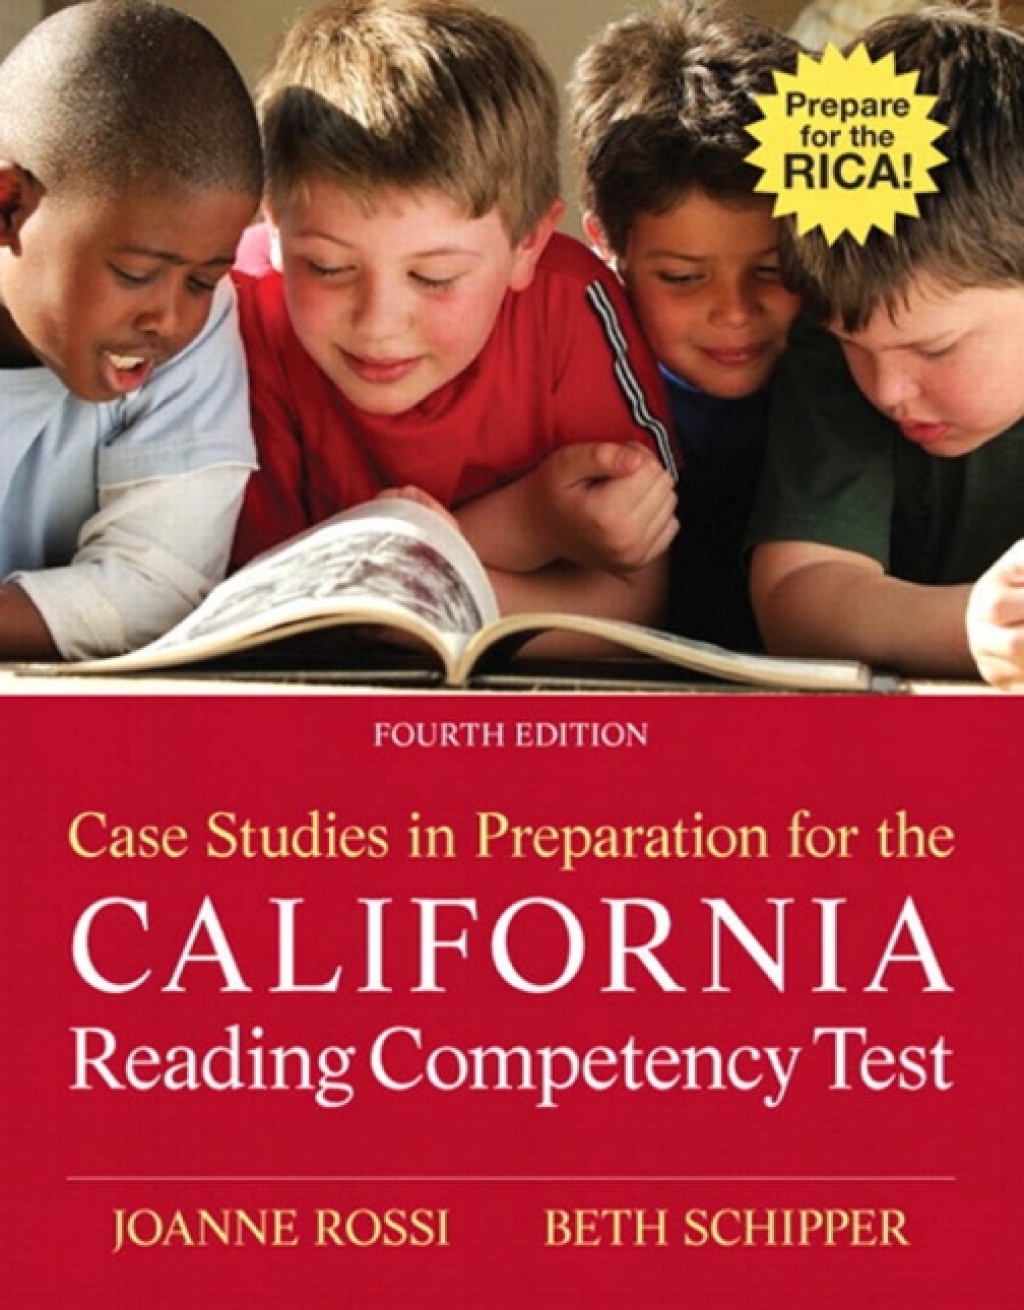 Case Studies in Preparation for the California Reading Competency Test - 4th Edition (eBook Rental)